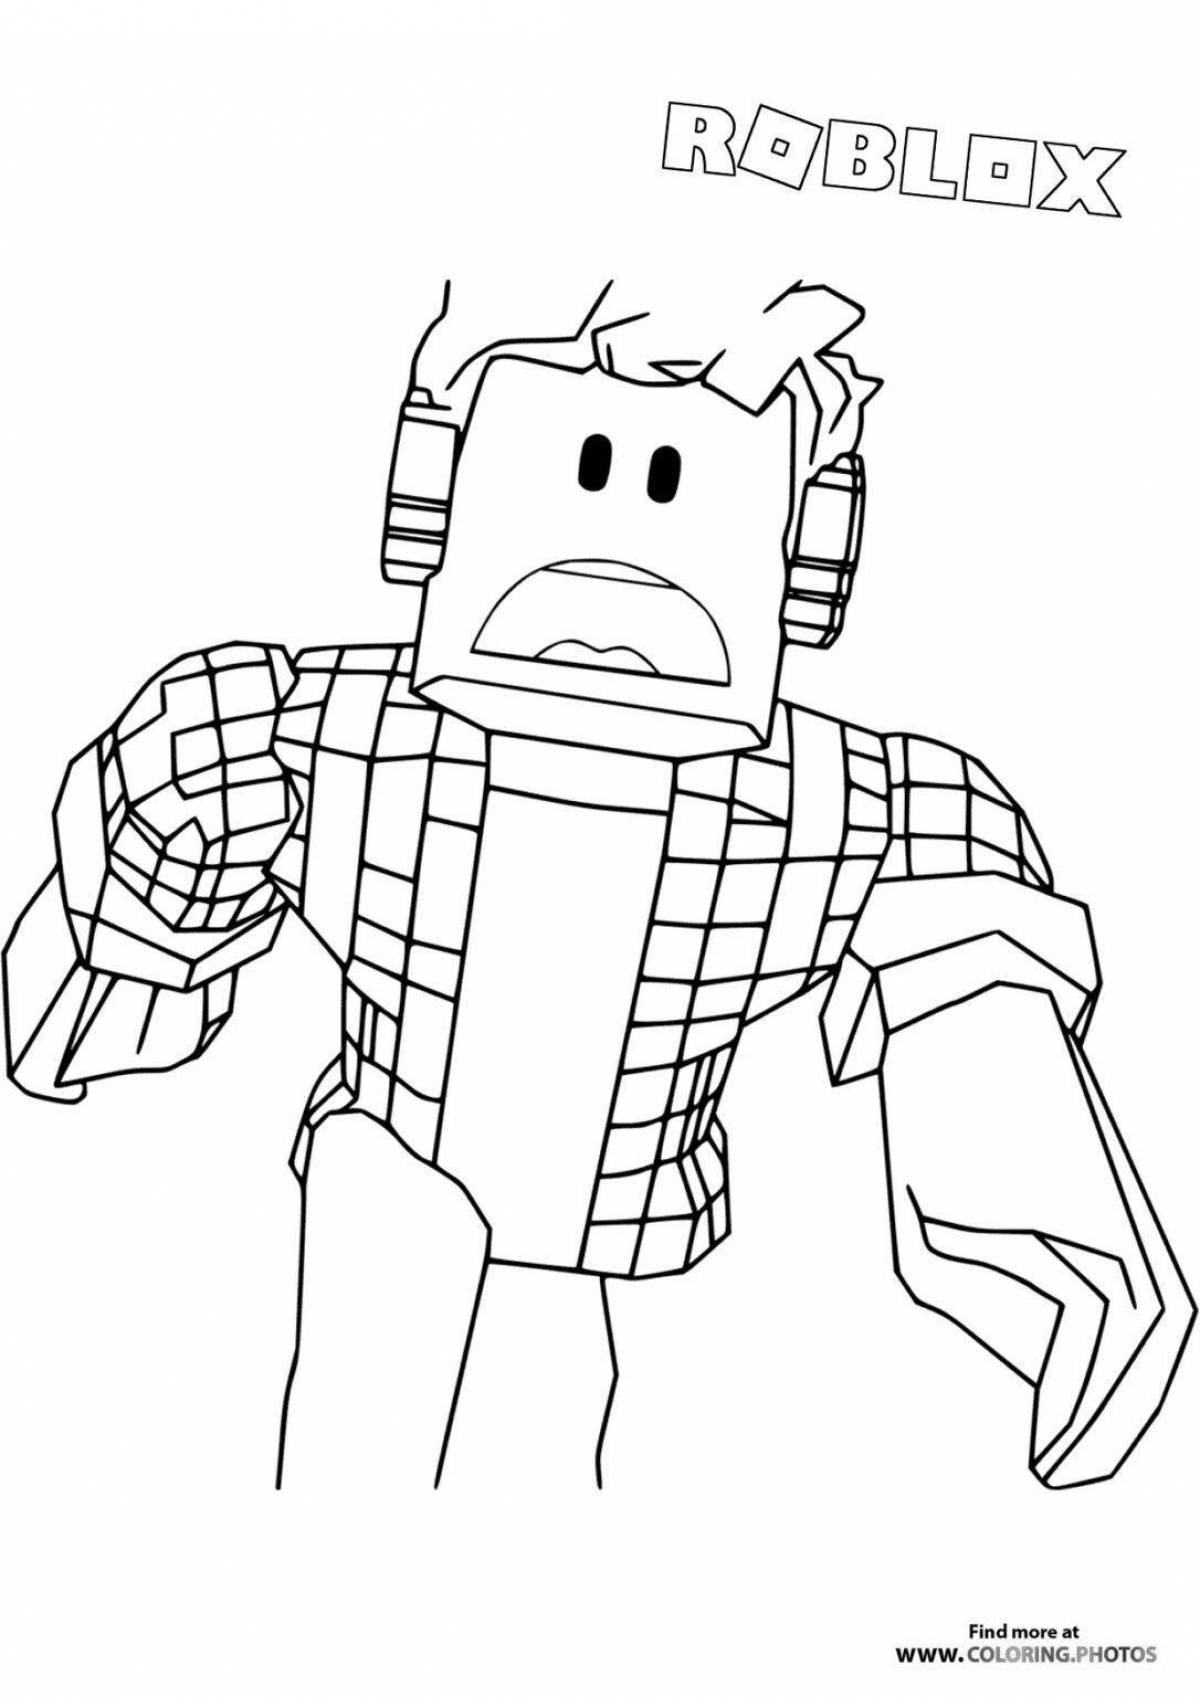 Amazing roblox marder mystery 2 coloring page